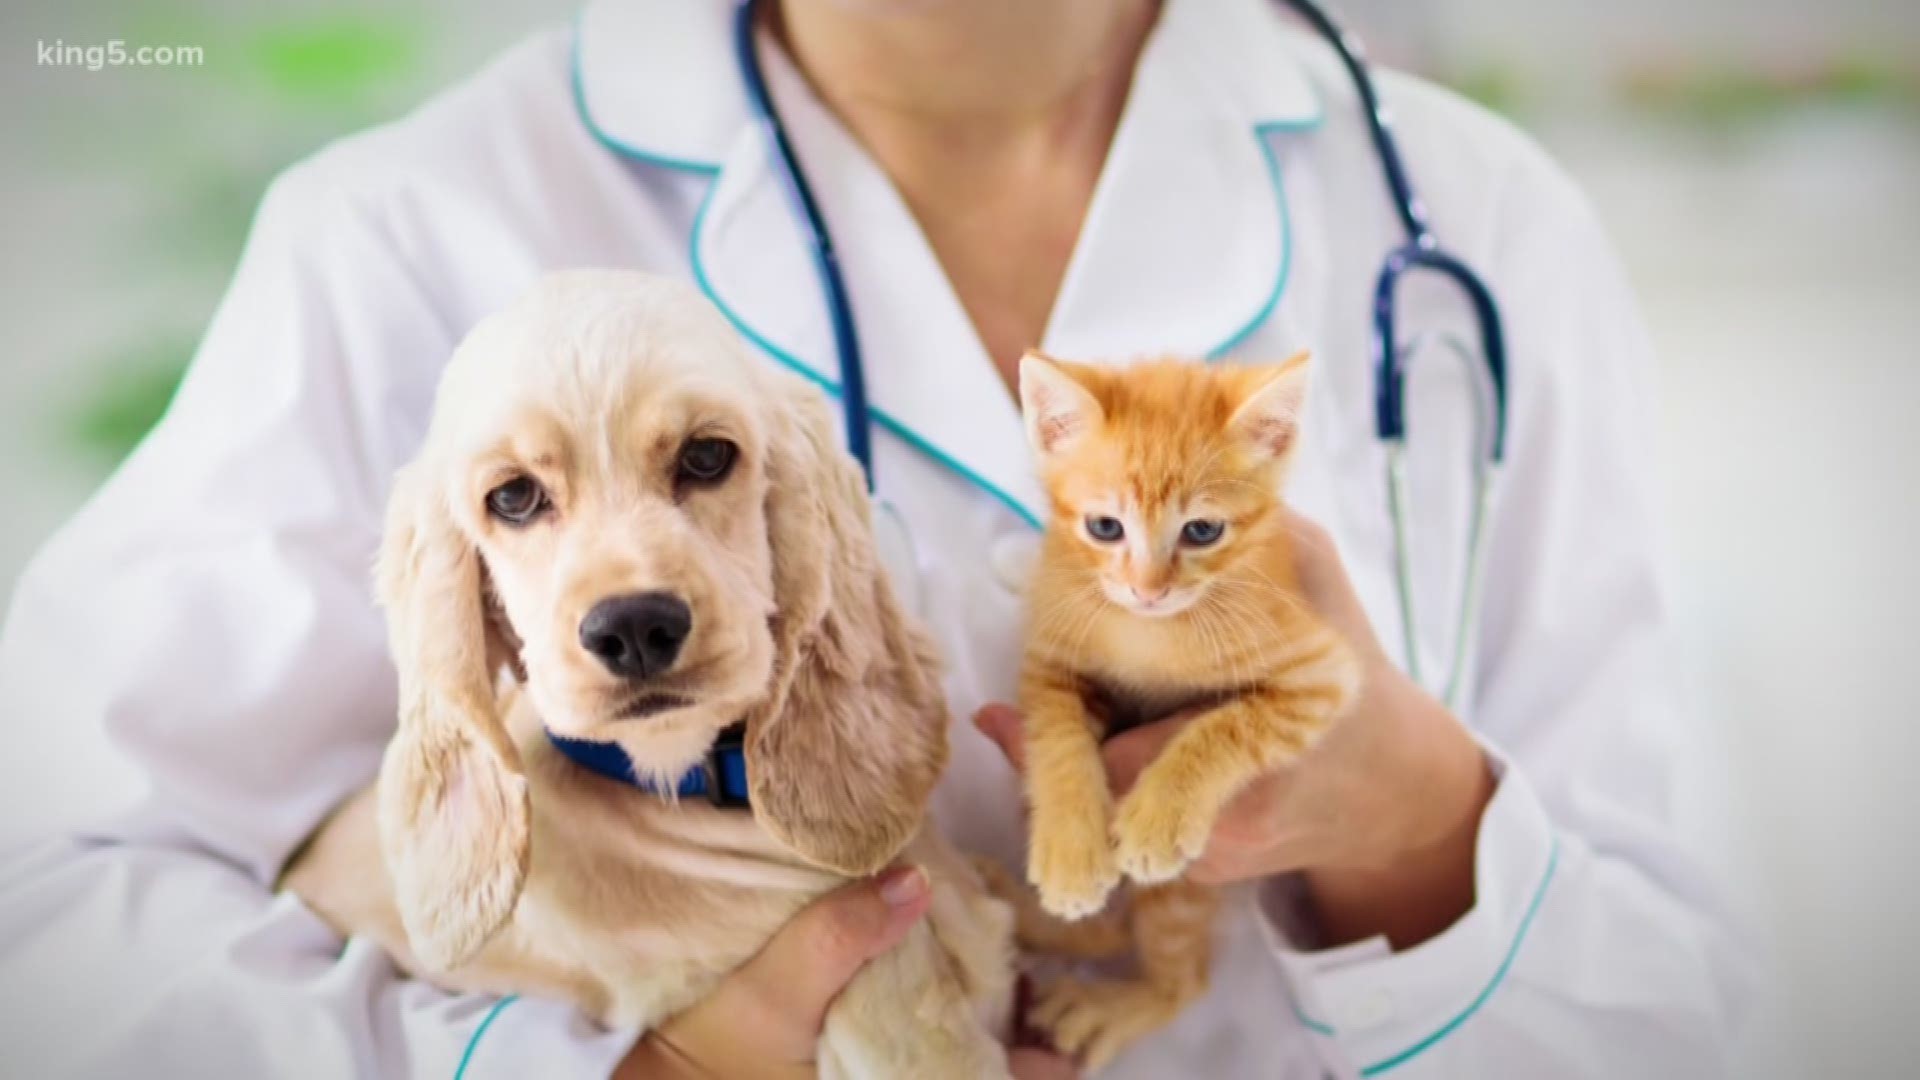 An article online says a Chinese scientist claims pets can catch coronavirus, but is it true?